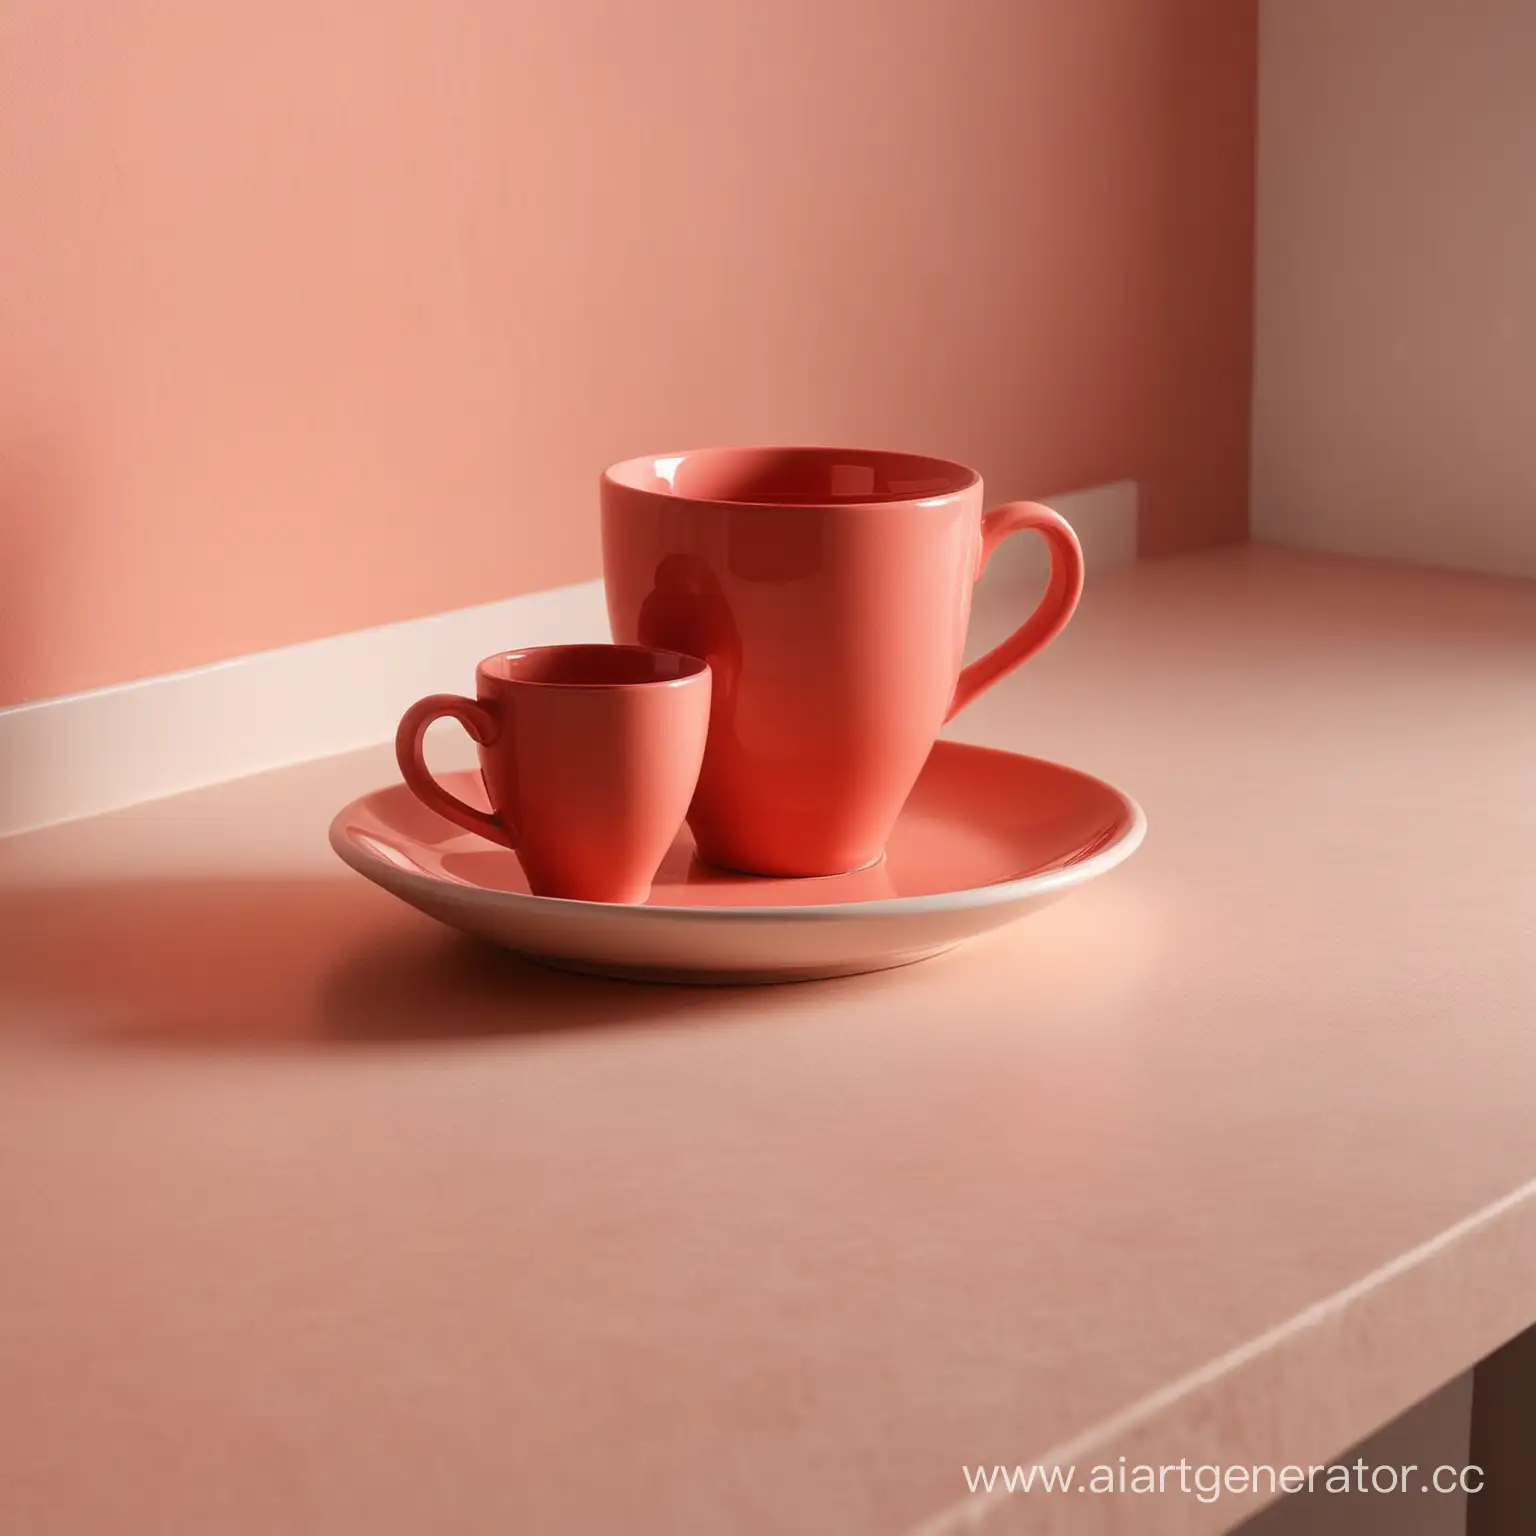 Kitchen-Still-Life-with-Cup-in-Soft-Red-Tones